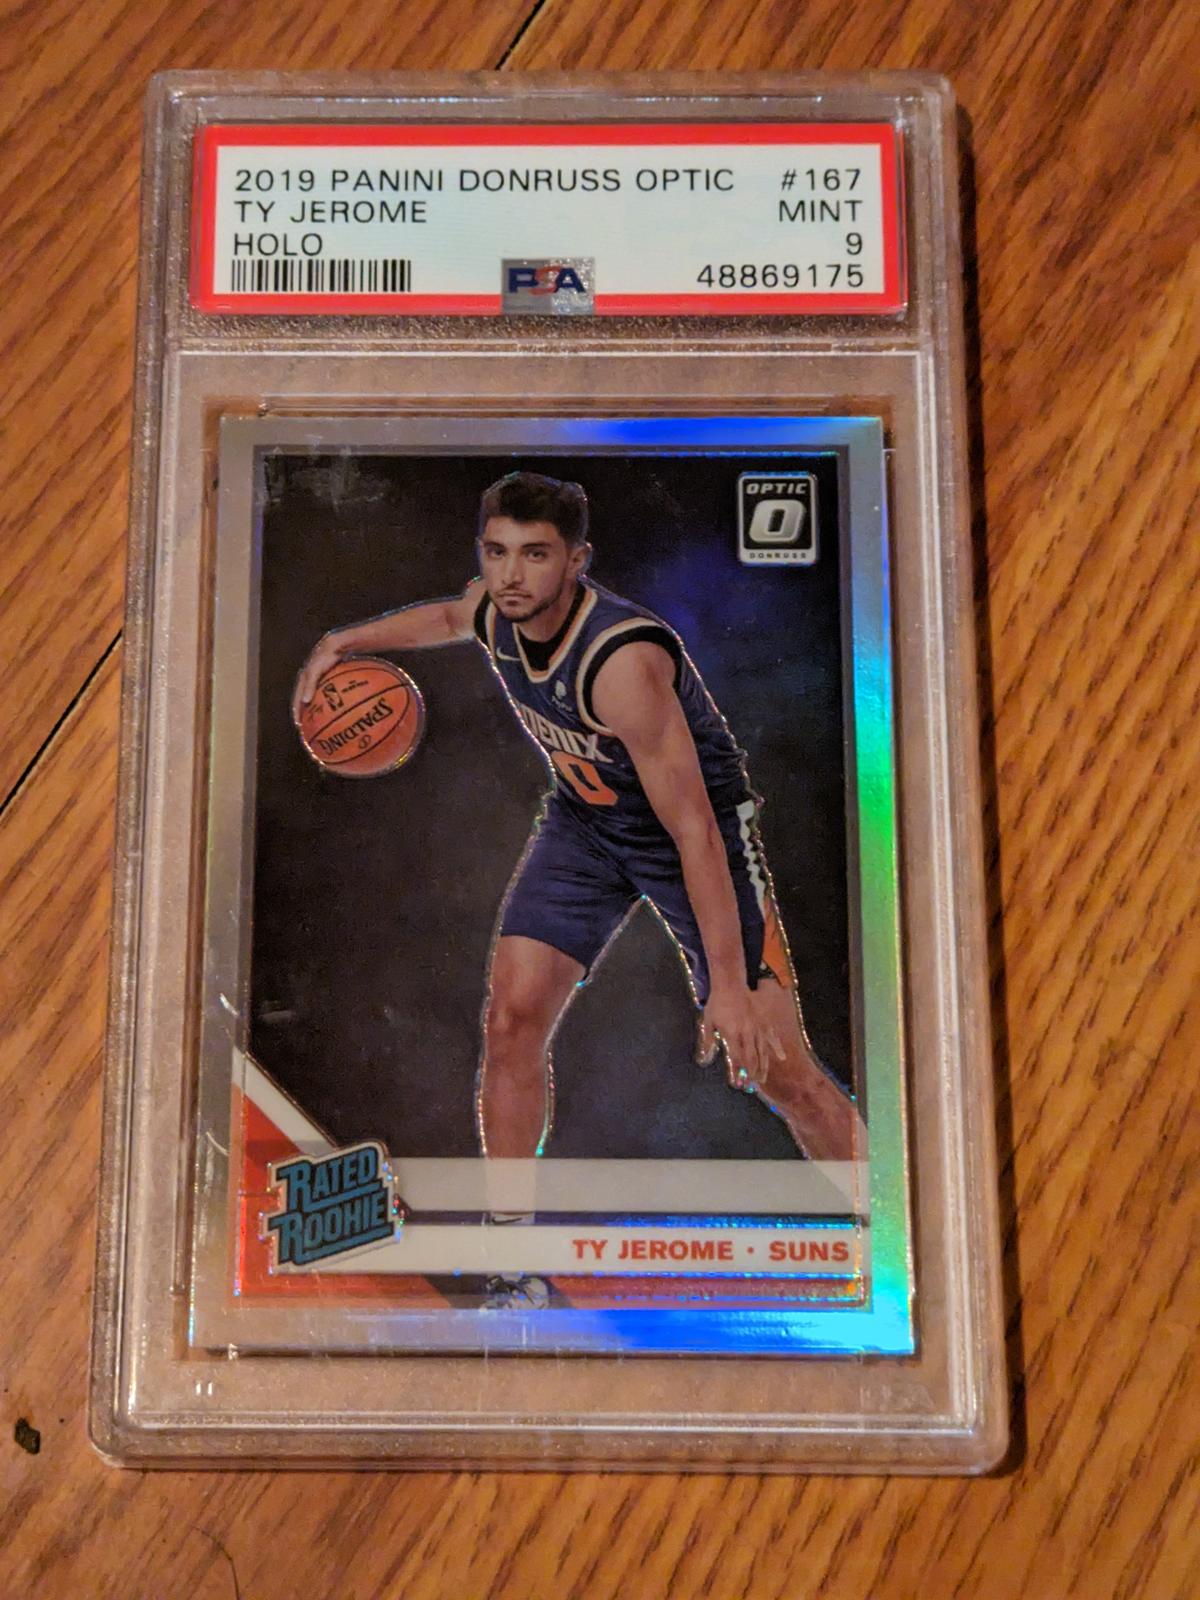 TY Jerome 2019 Donruss optic mint 9 graded by psa holo Refractor Rated Rookie